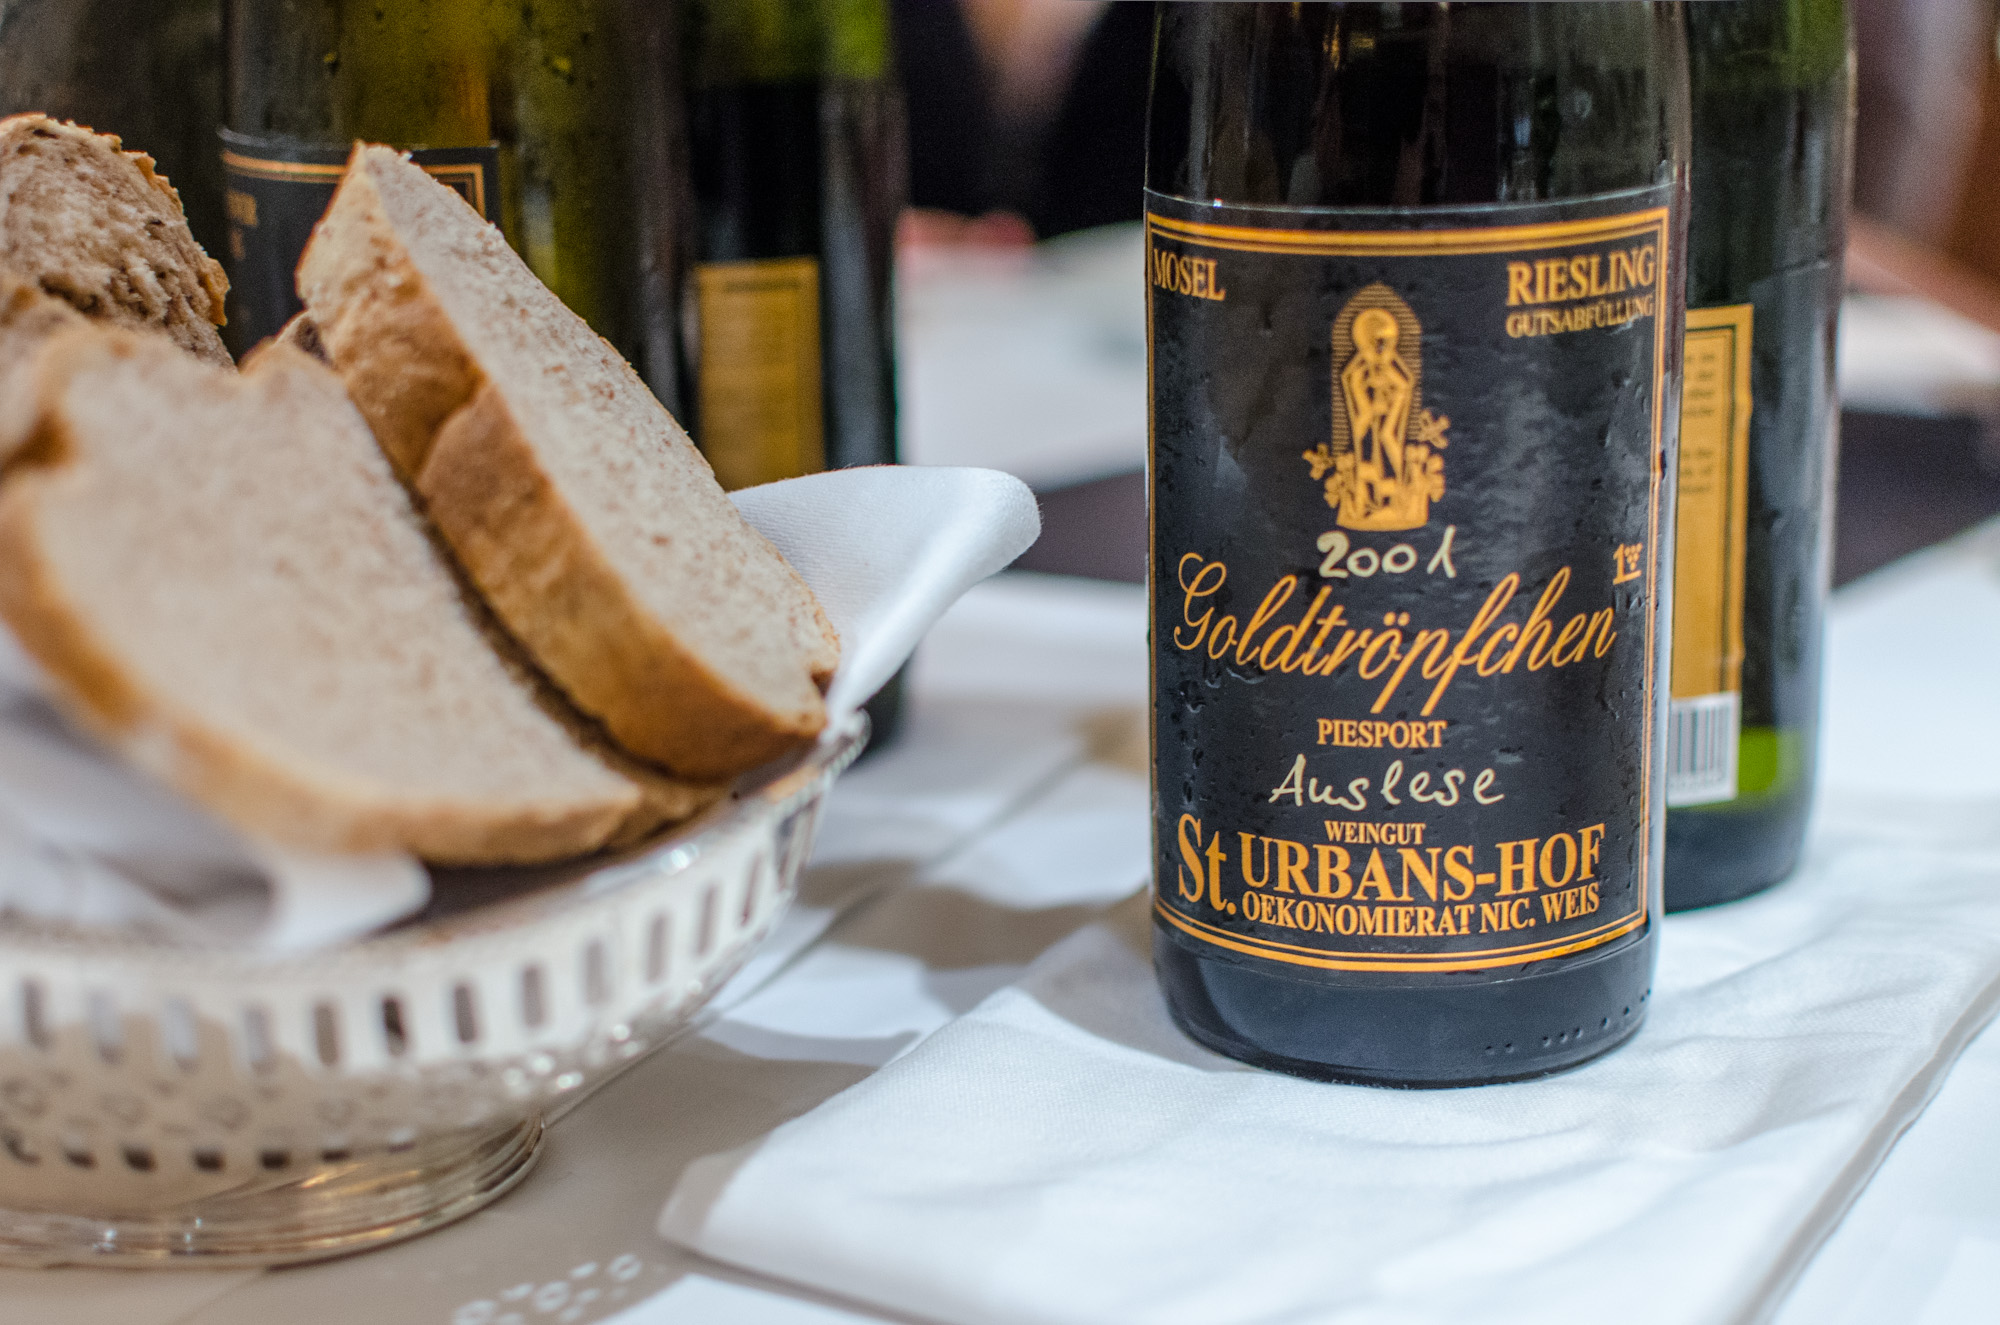 Riesling and bread